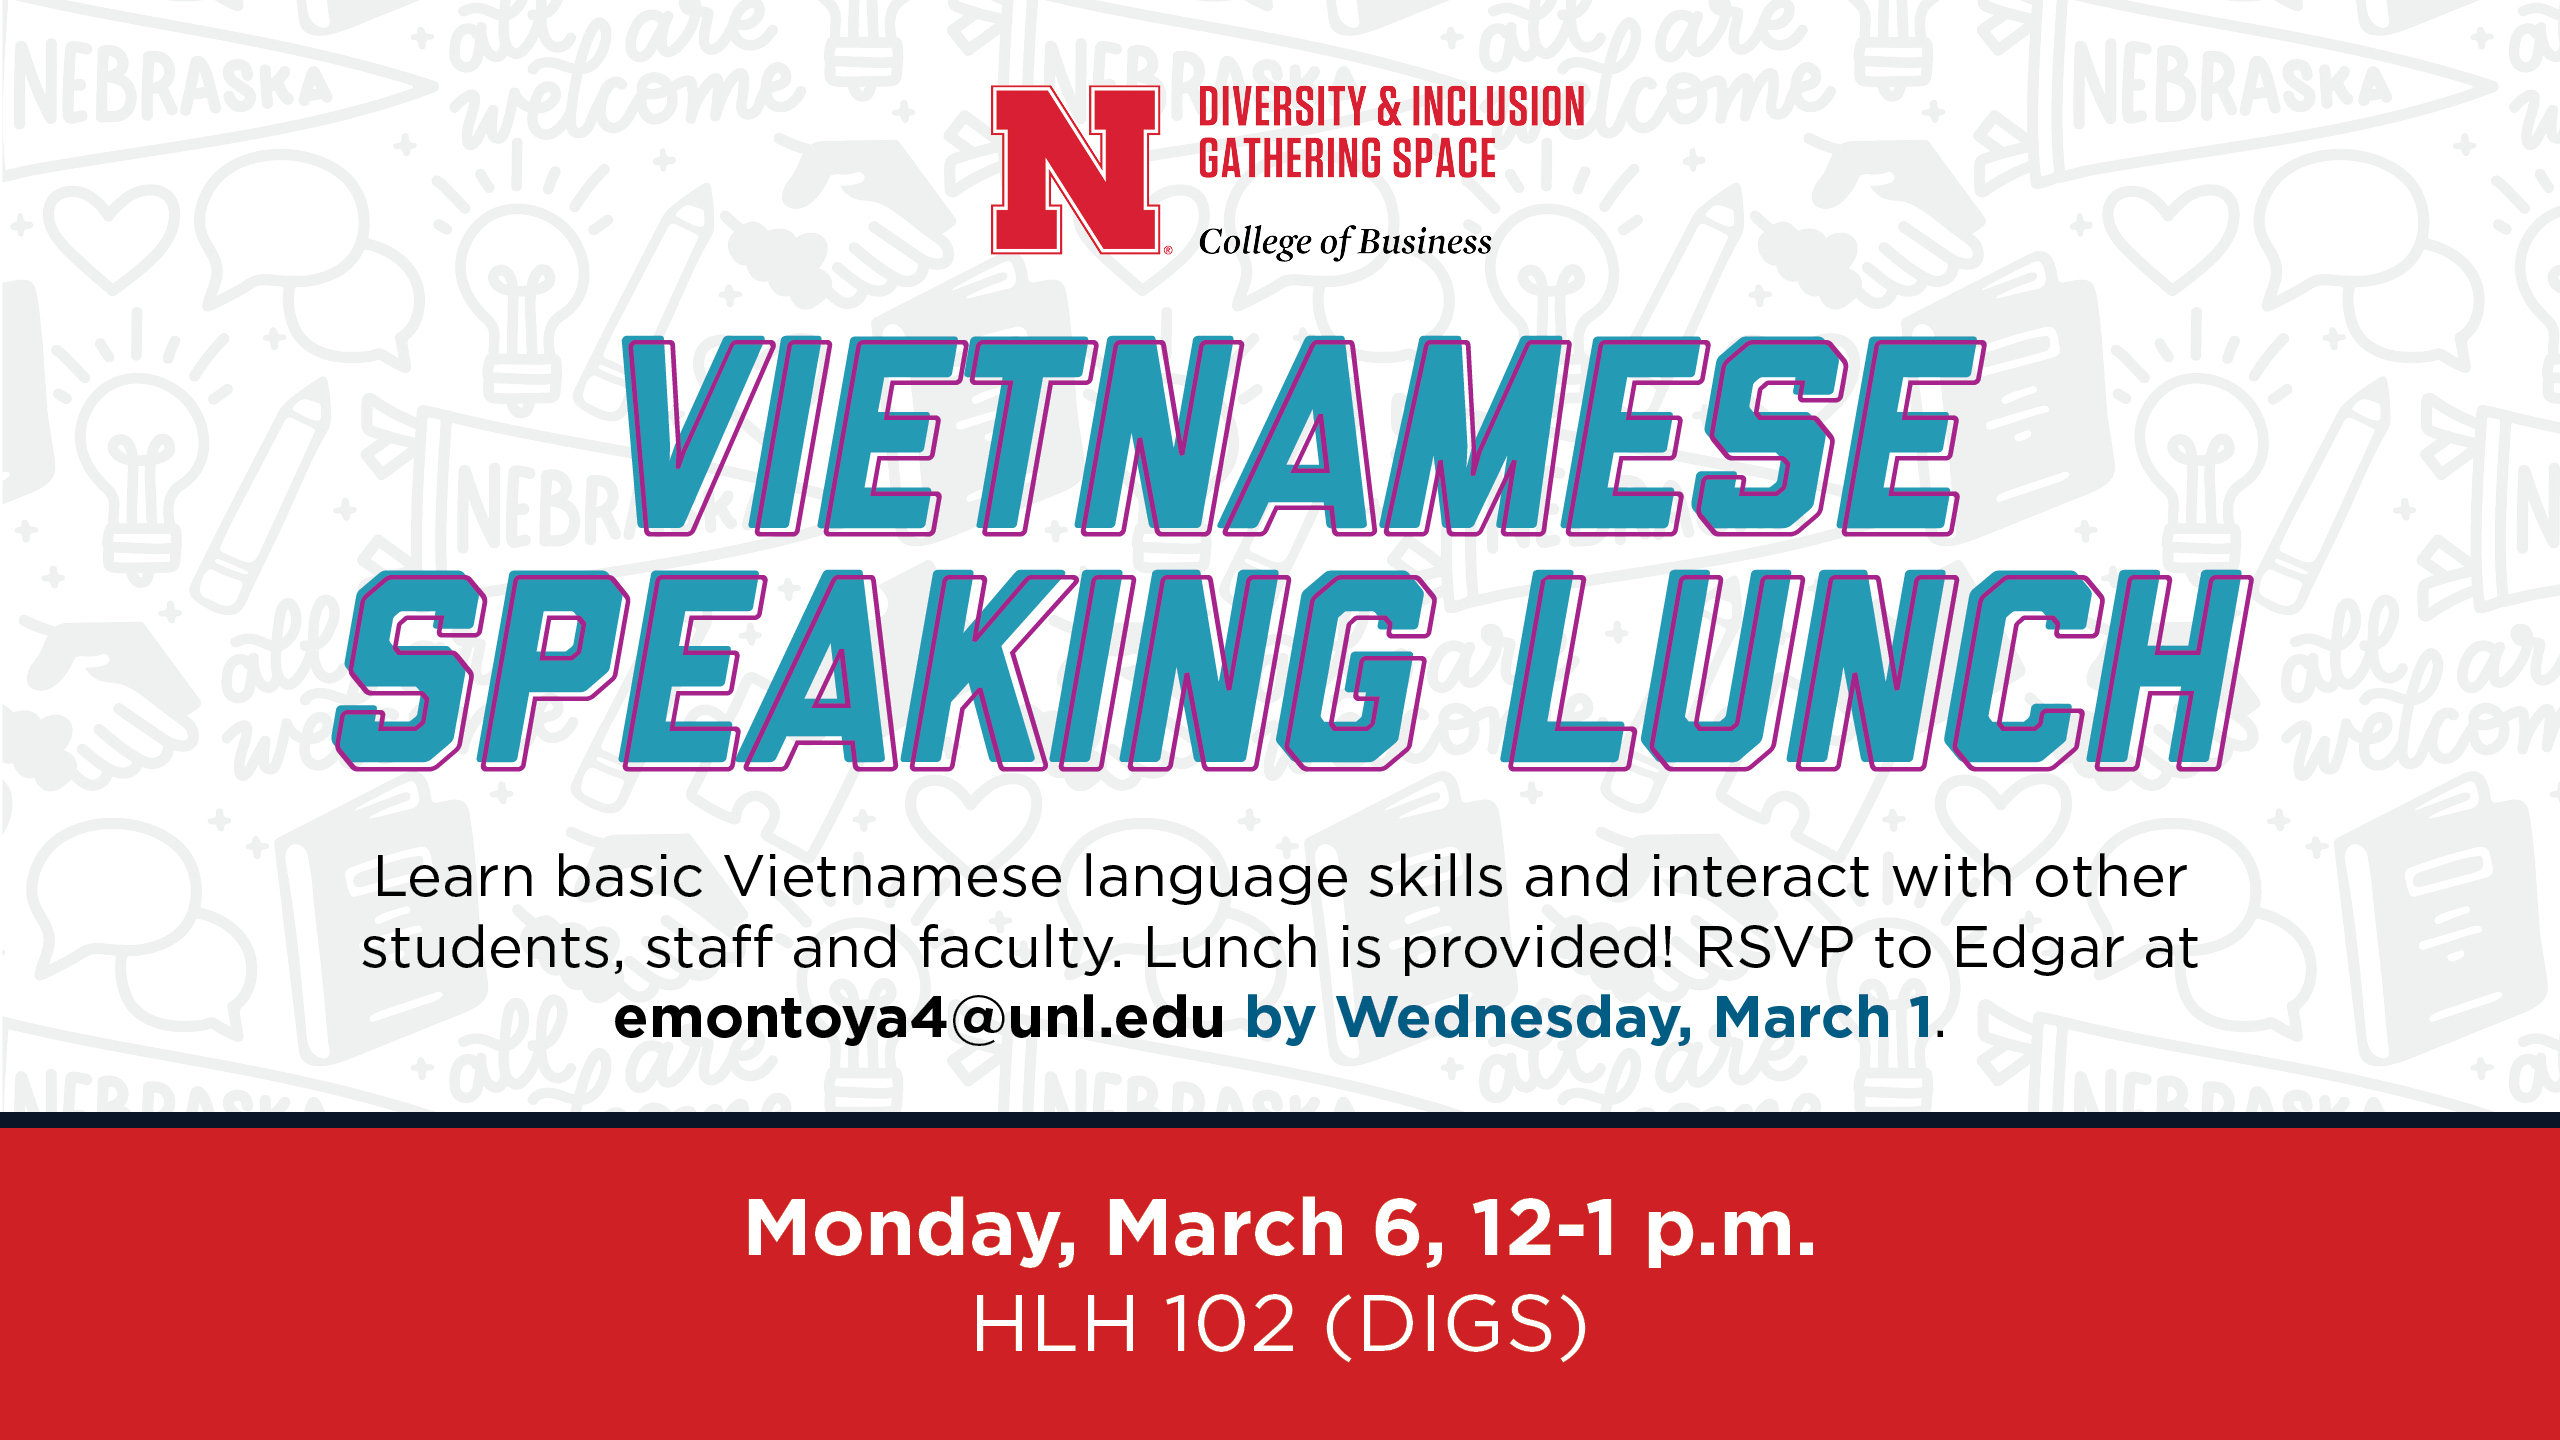 Vietnamese Speaking Lunch | DIGS HLH 102 | March 6